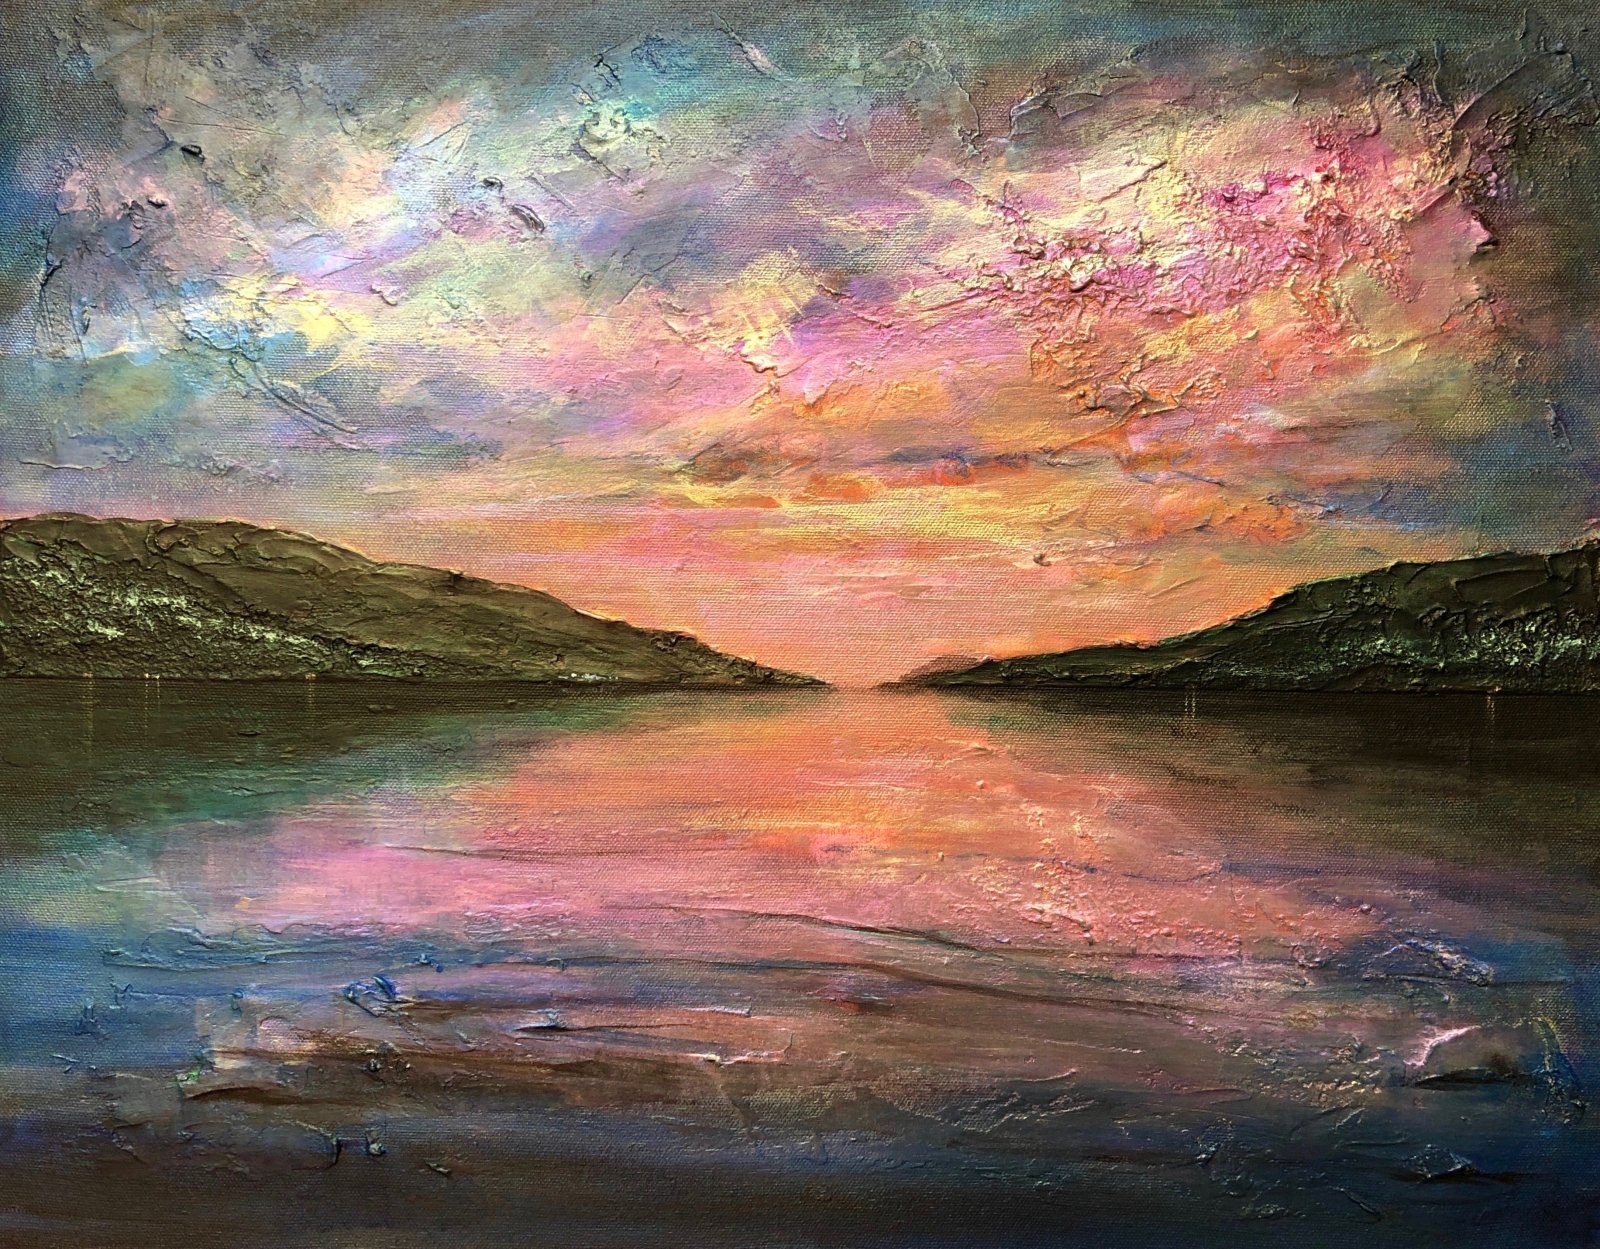 Loch Ness Dawn-Signed Art Prints By Scottish Artist Hunter-Scottish Lochs & Mountains Art Gallery-Paintings, Prints, Homeware, Art Gifts From Scotland By Scottish Artist Kevin Hunter